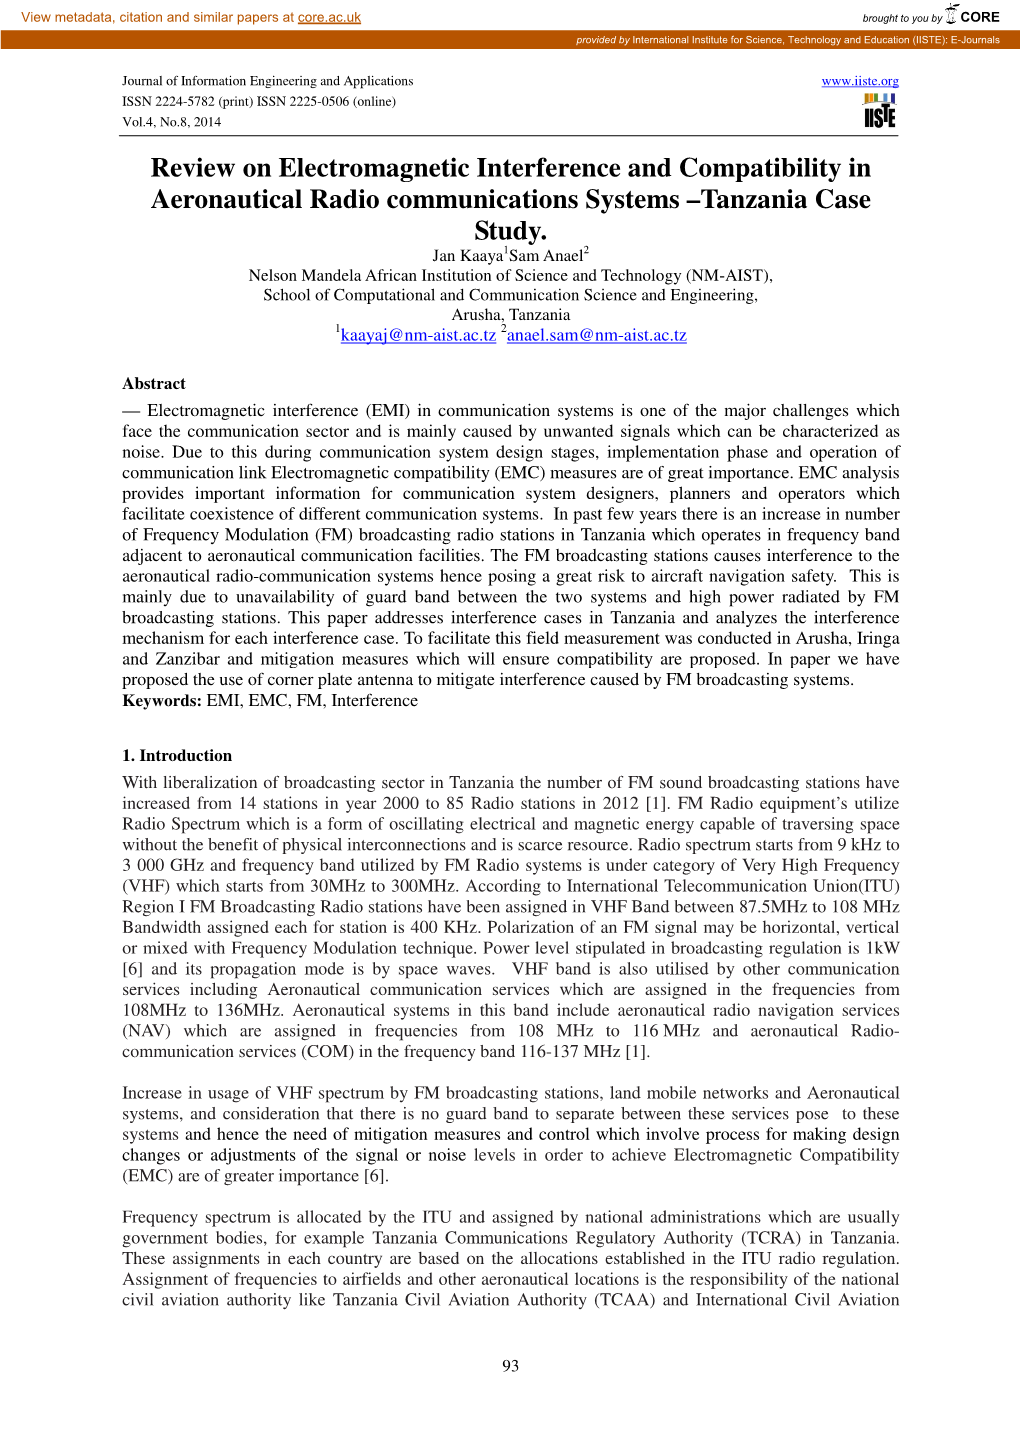 Review on Electromagnetic Interference and Compatibility in Aeronautical Radio Communications Systems –Tanzania Case Study